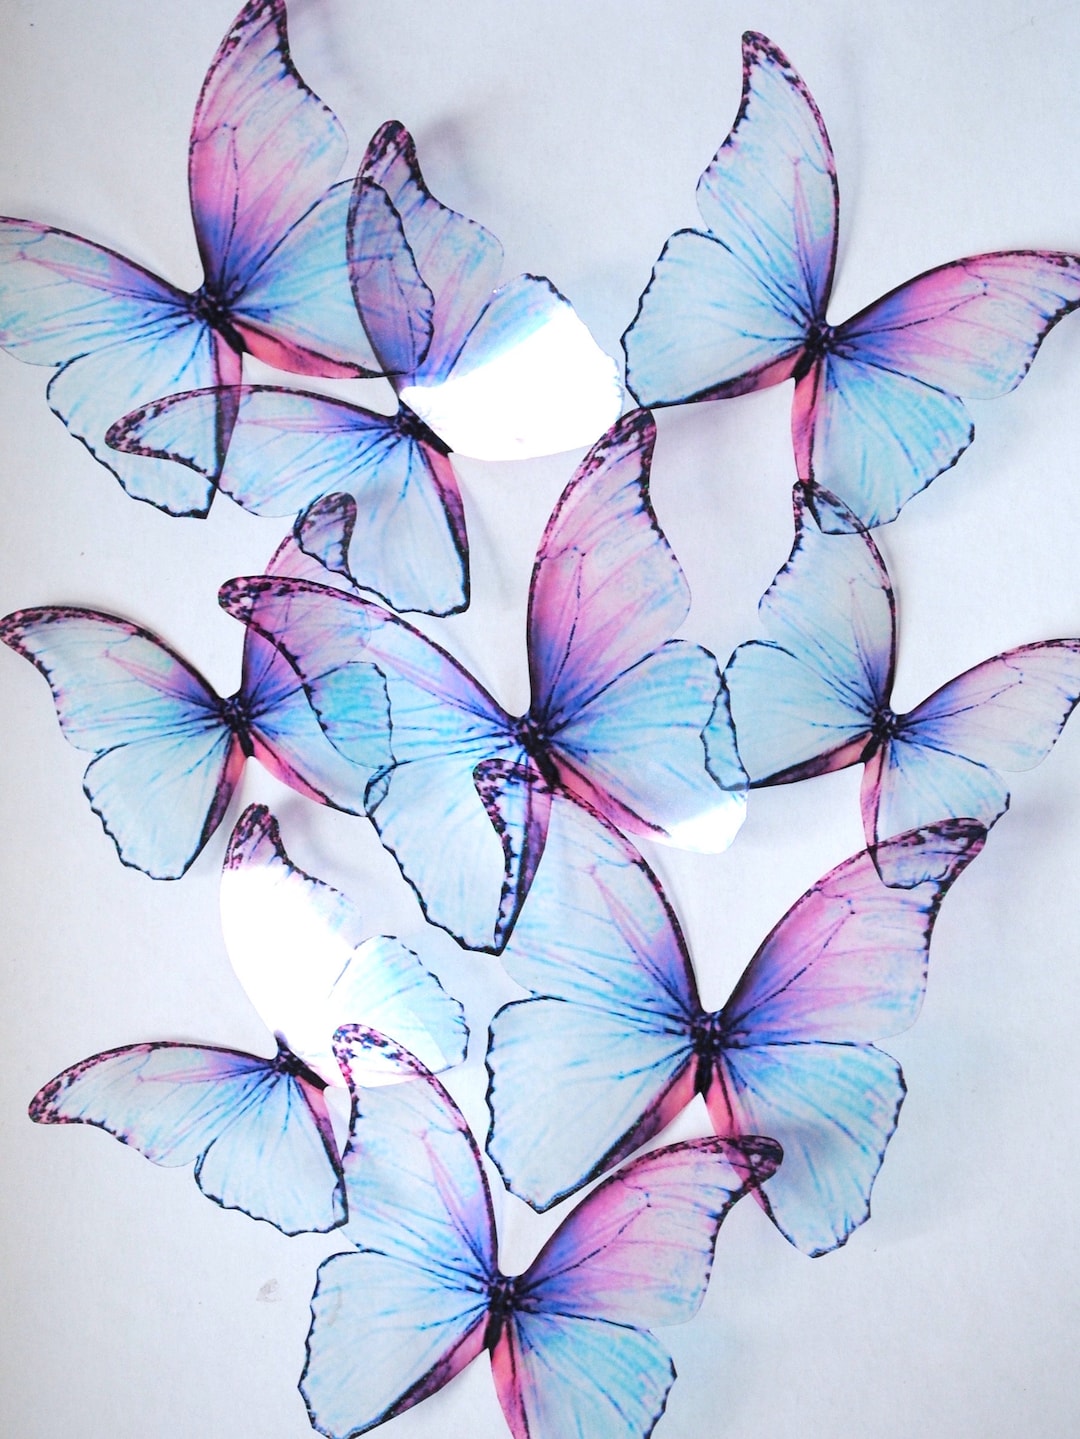 Butterflies in Blue Labels for Nursing Home